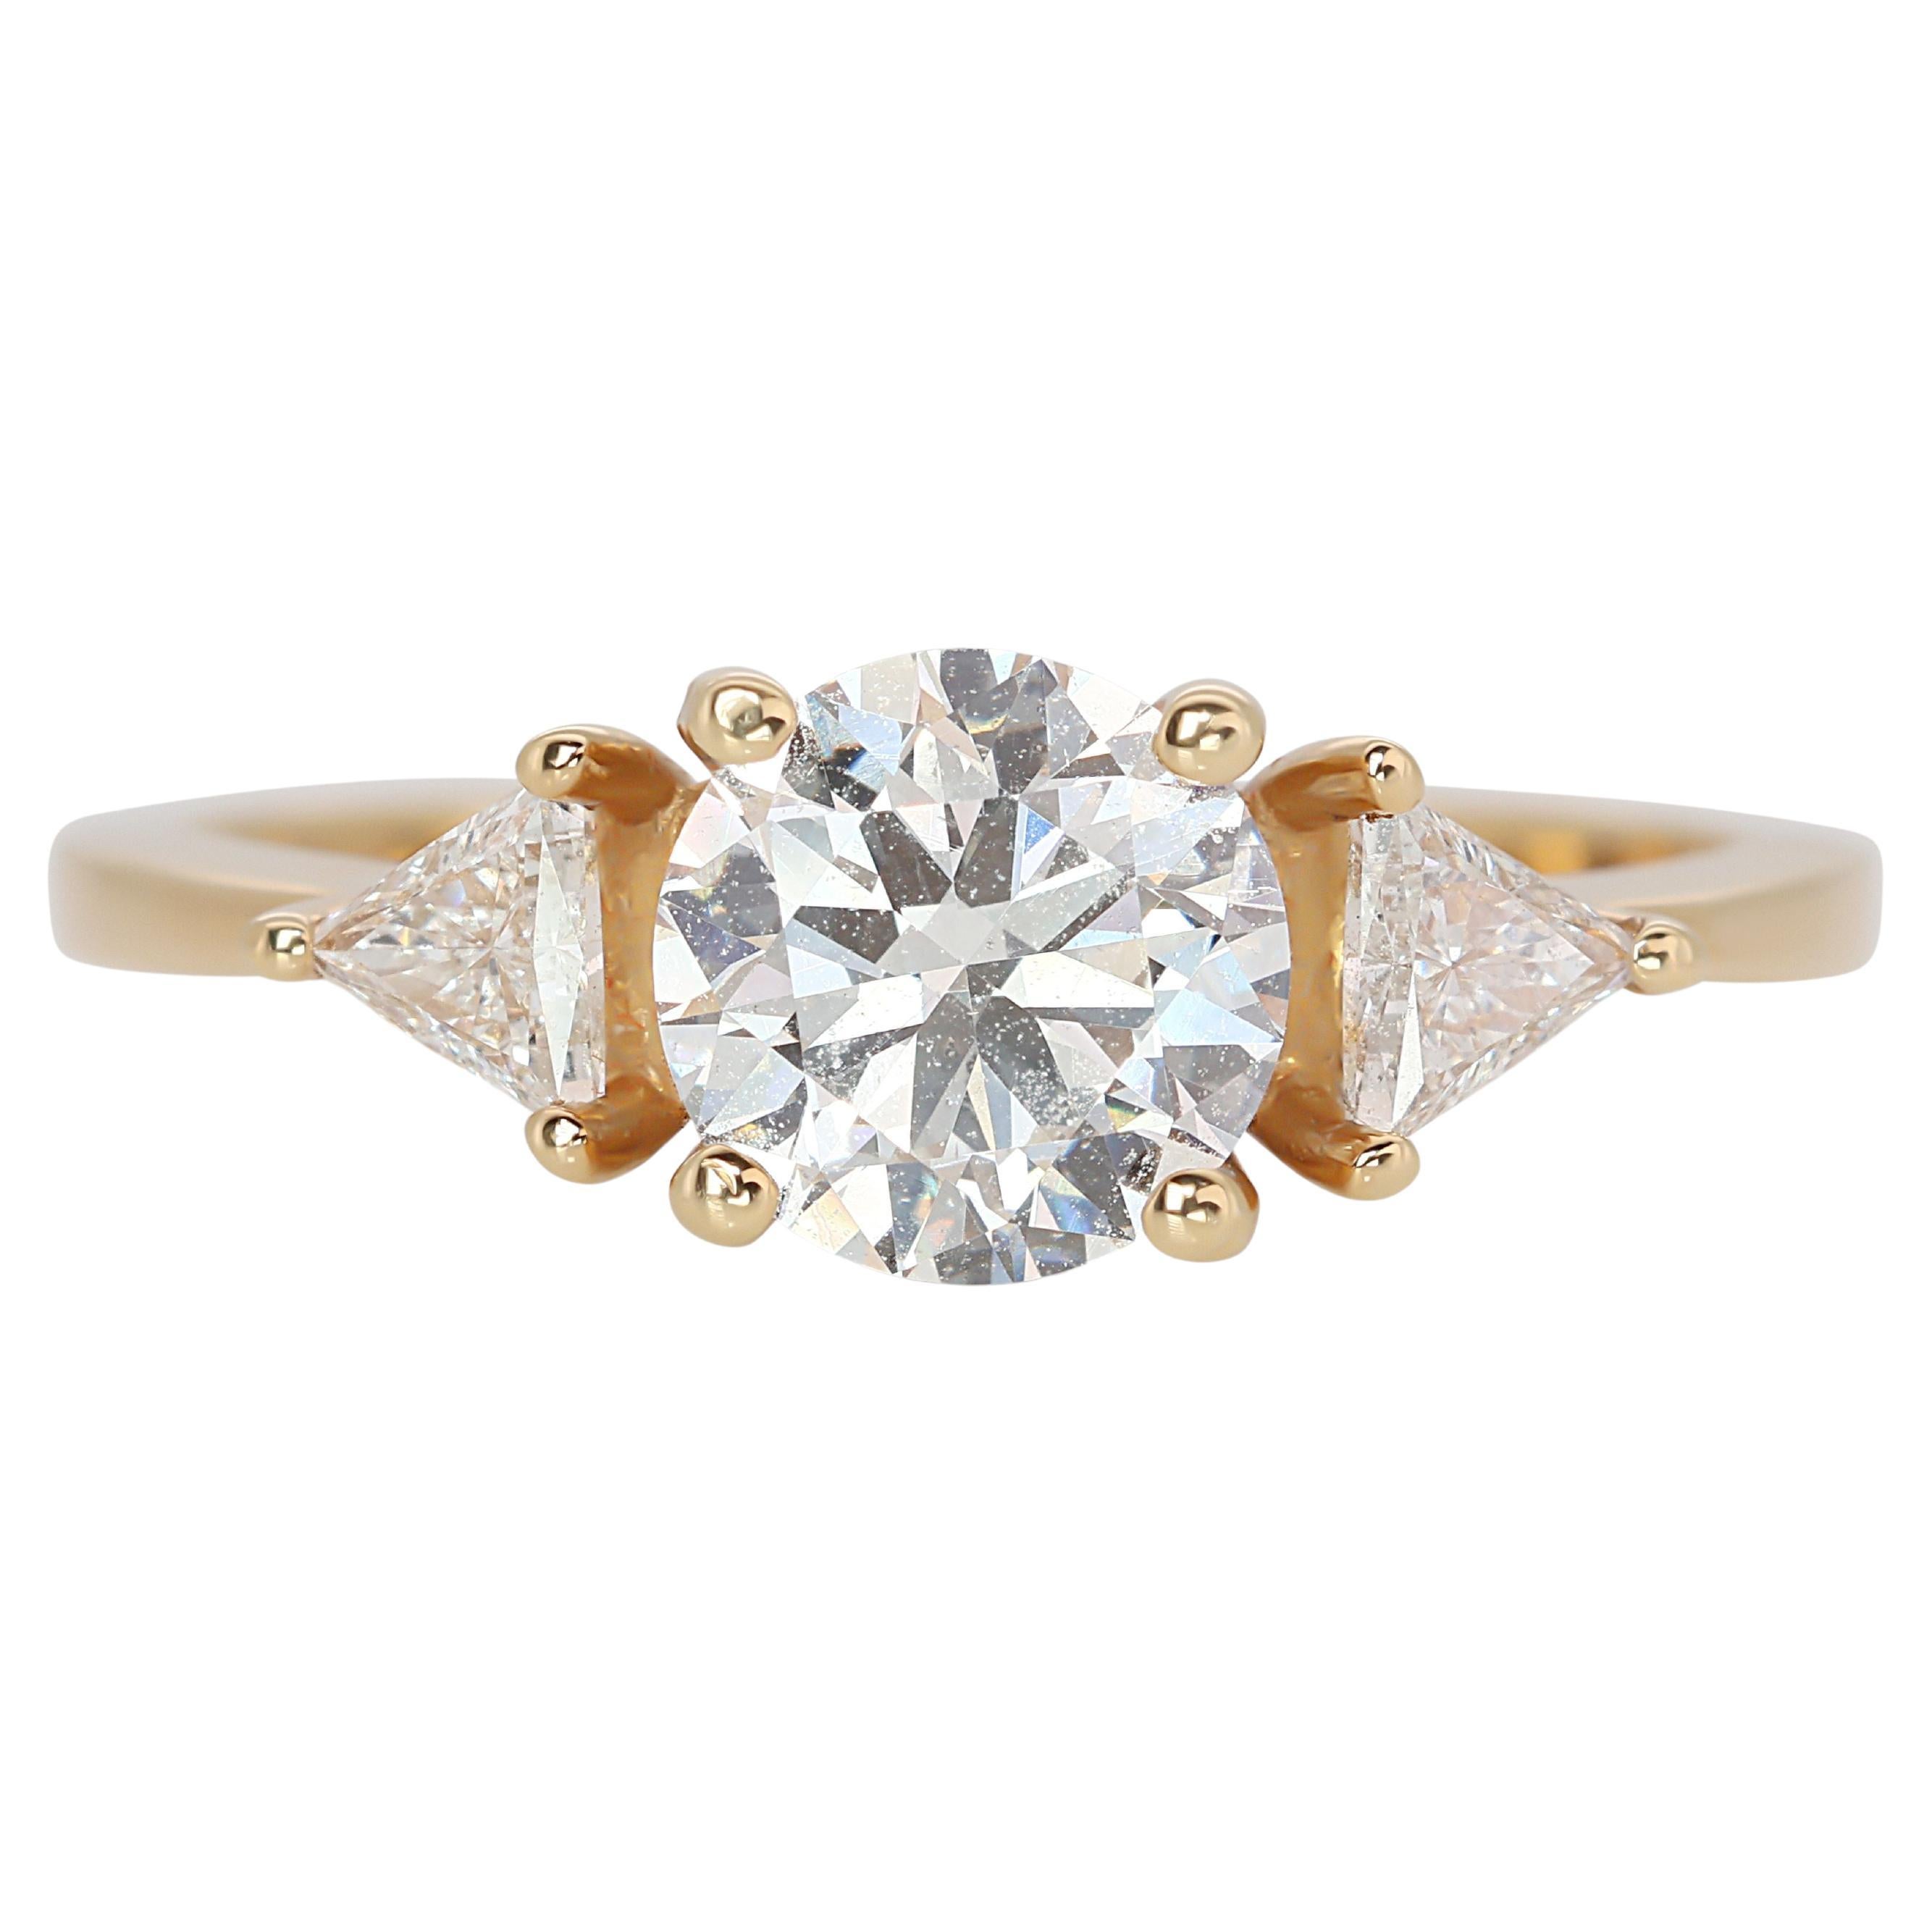 Captivating 3-stone 1.21ct Diamond Ring set in 18K Yellow Gold For Sale